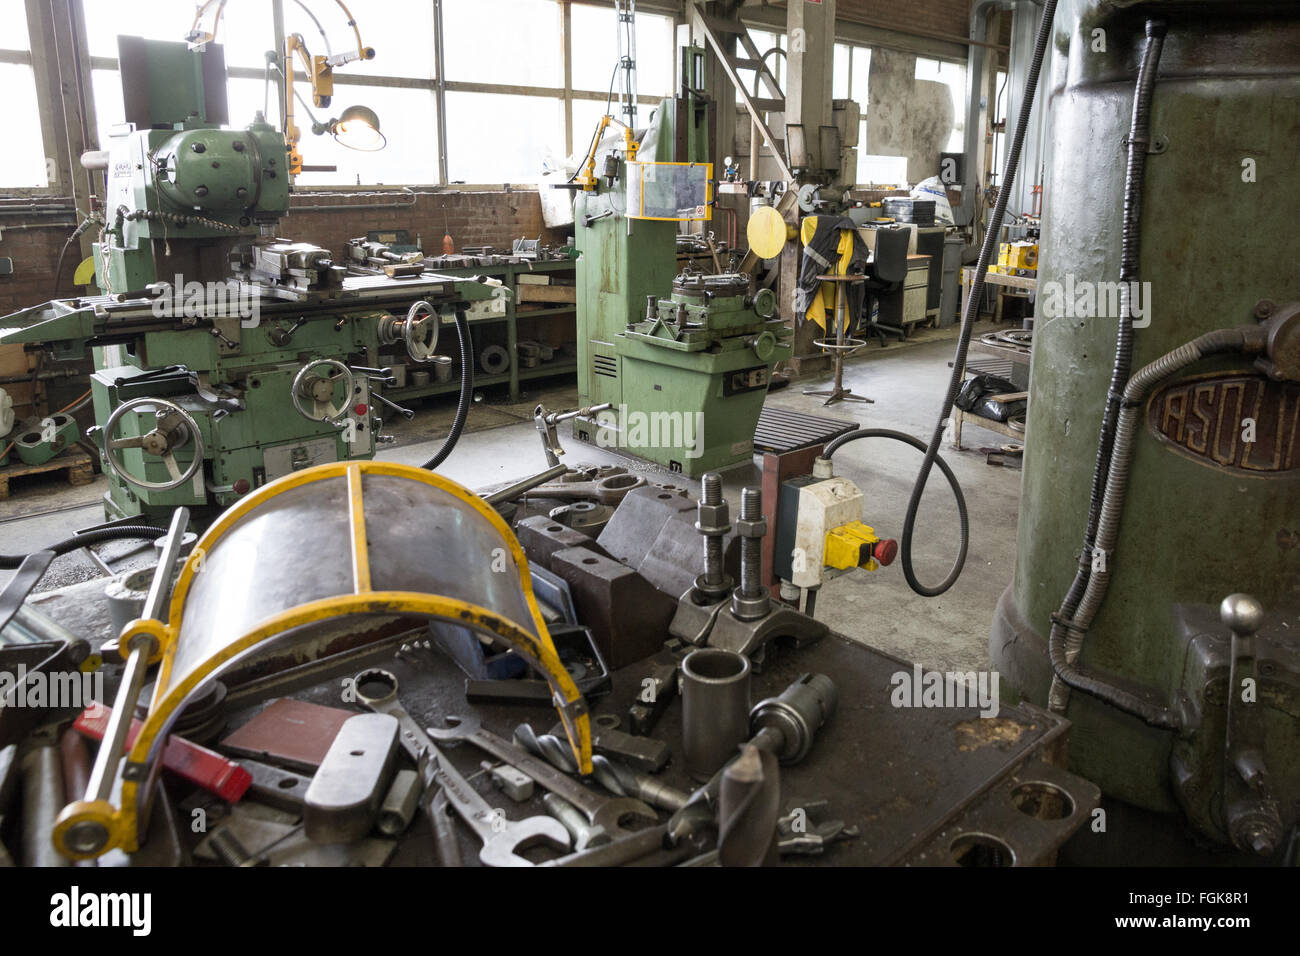 Tools and equipment in an industrial factory Stock Photo